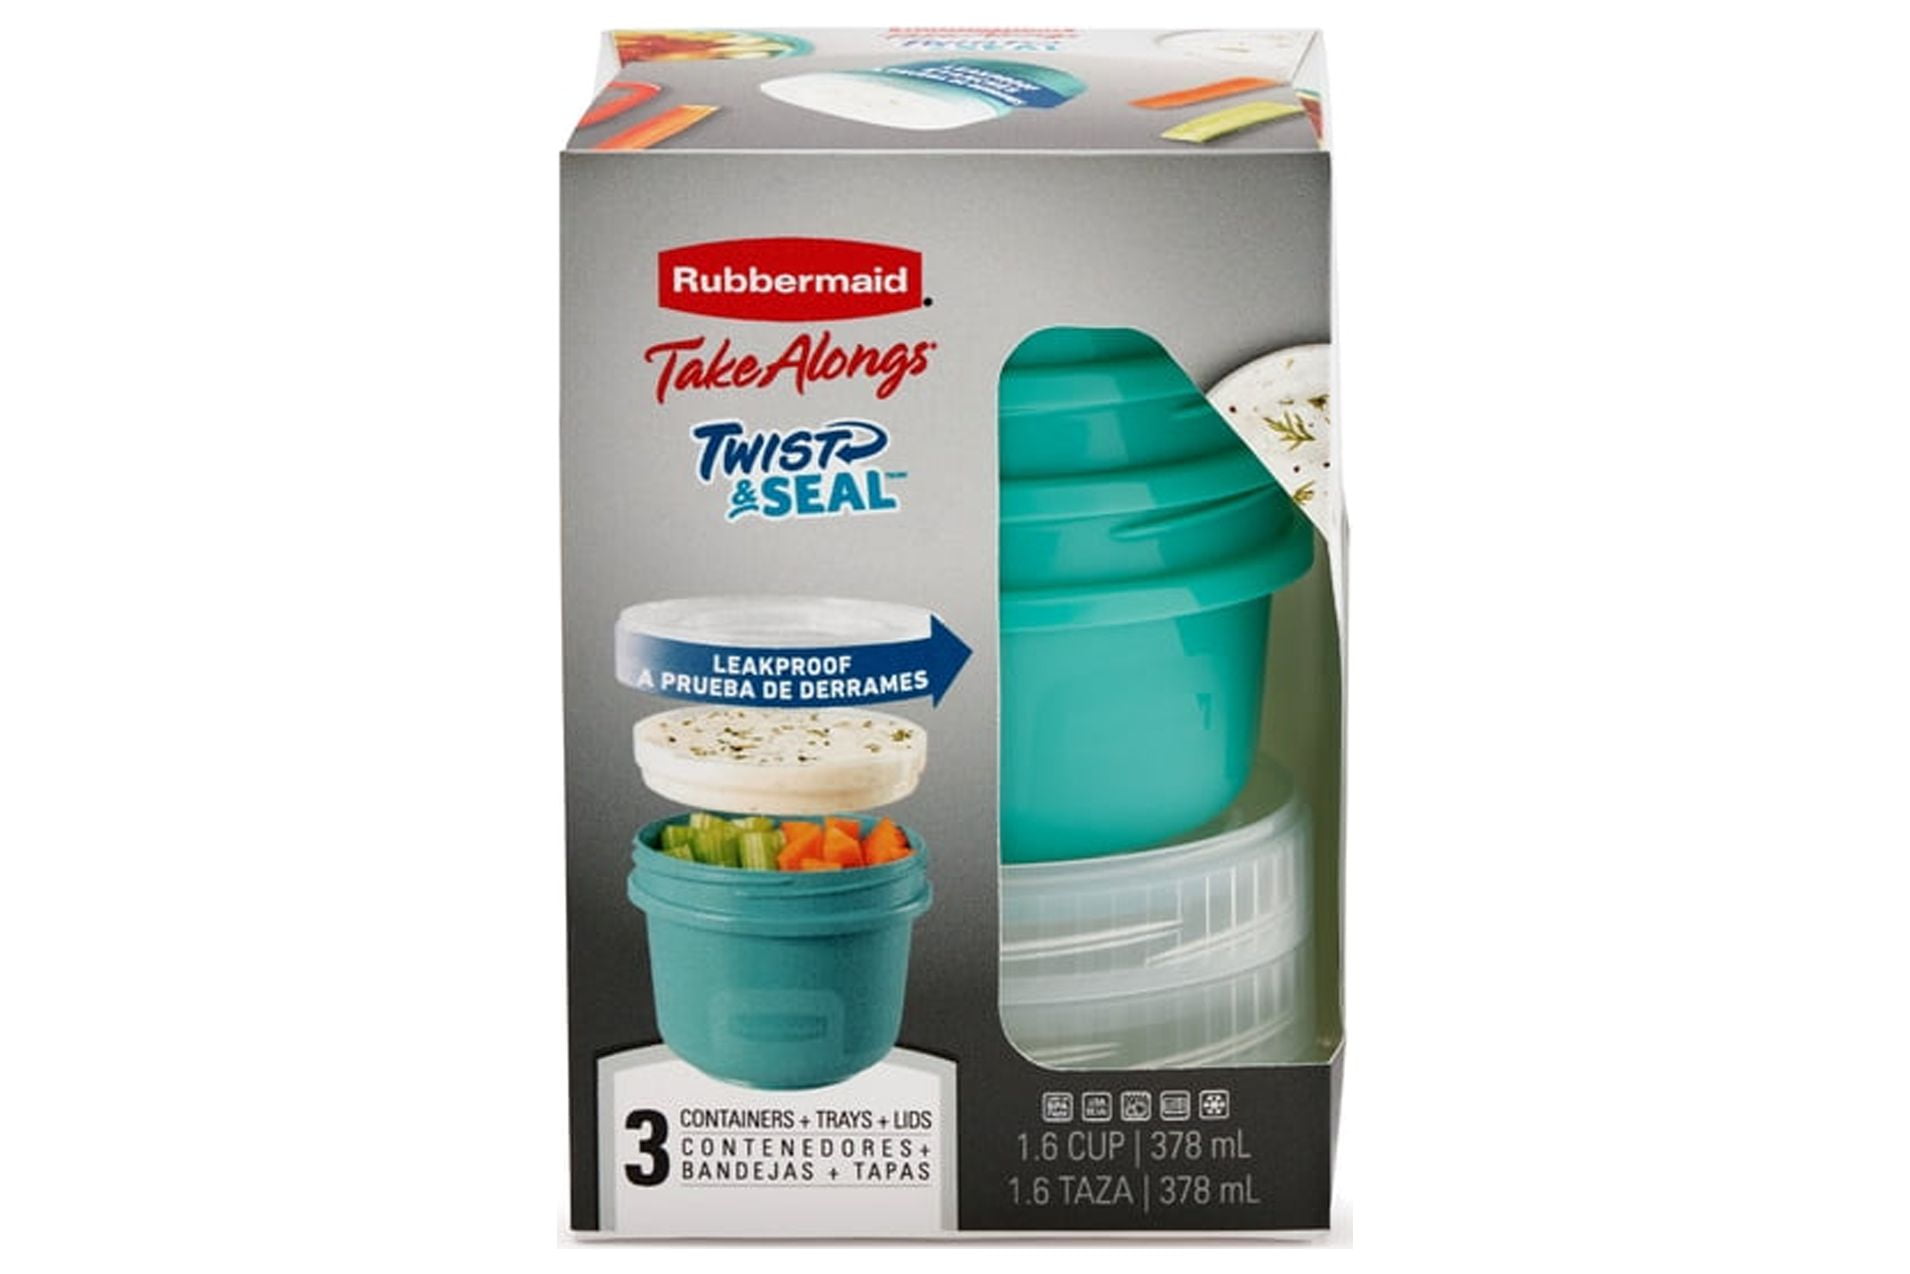 Rubbermaid Take Alongs Twist & Seal Food Storage Containers & Lids